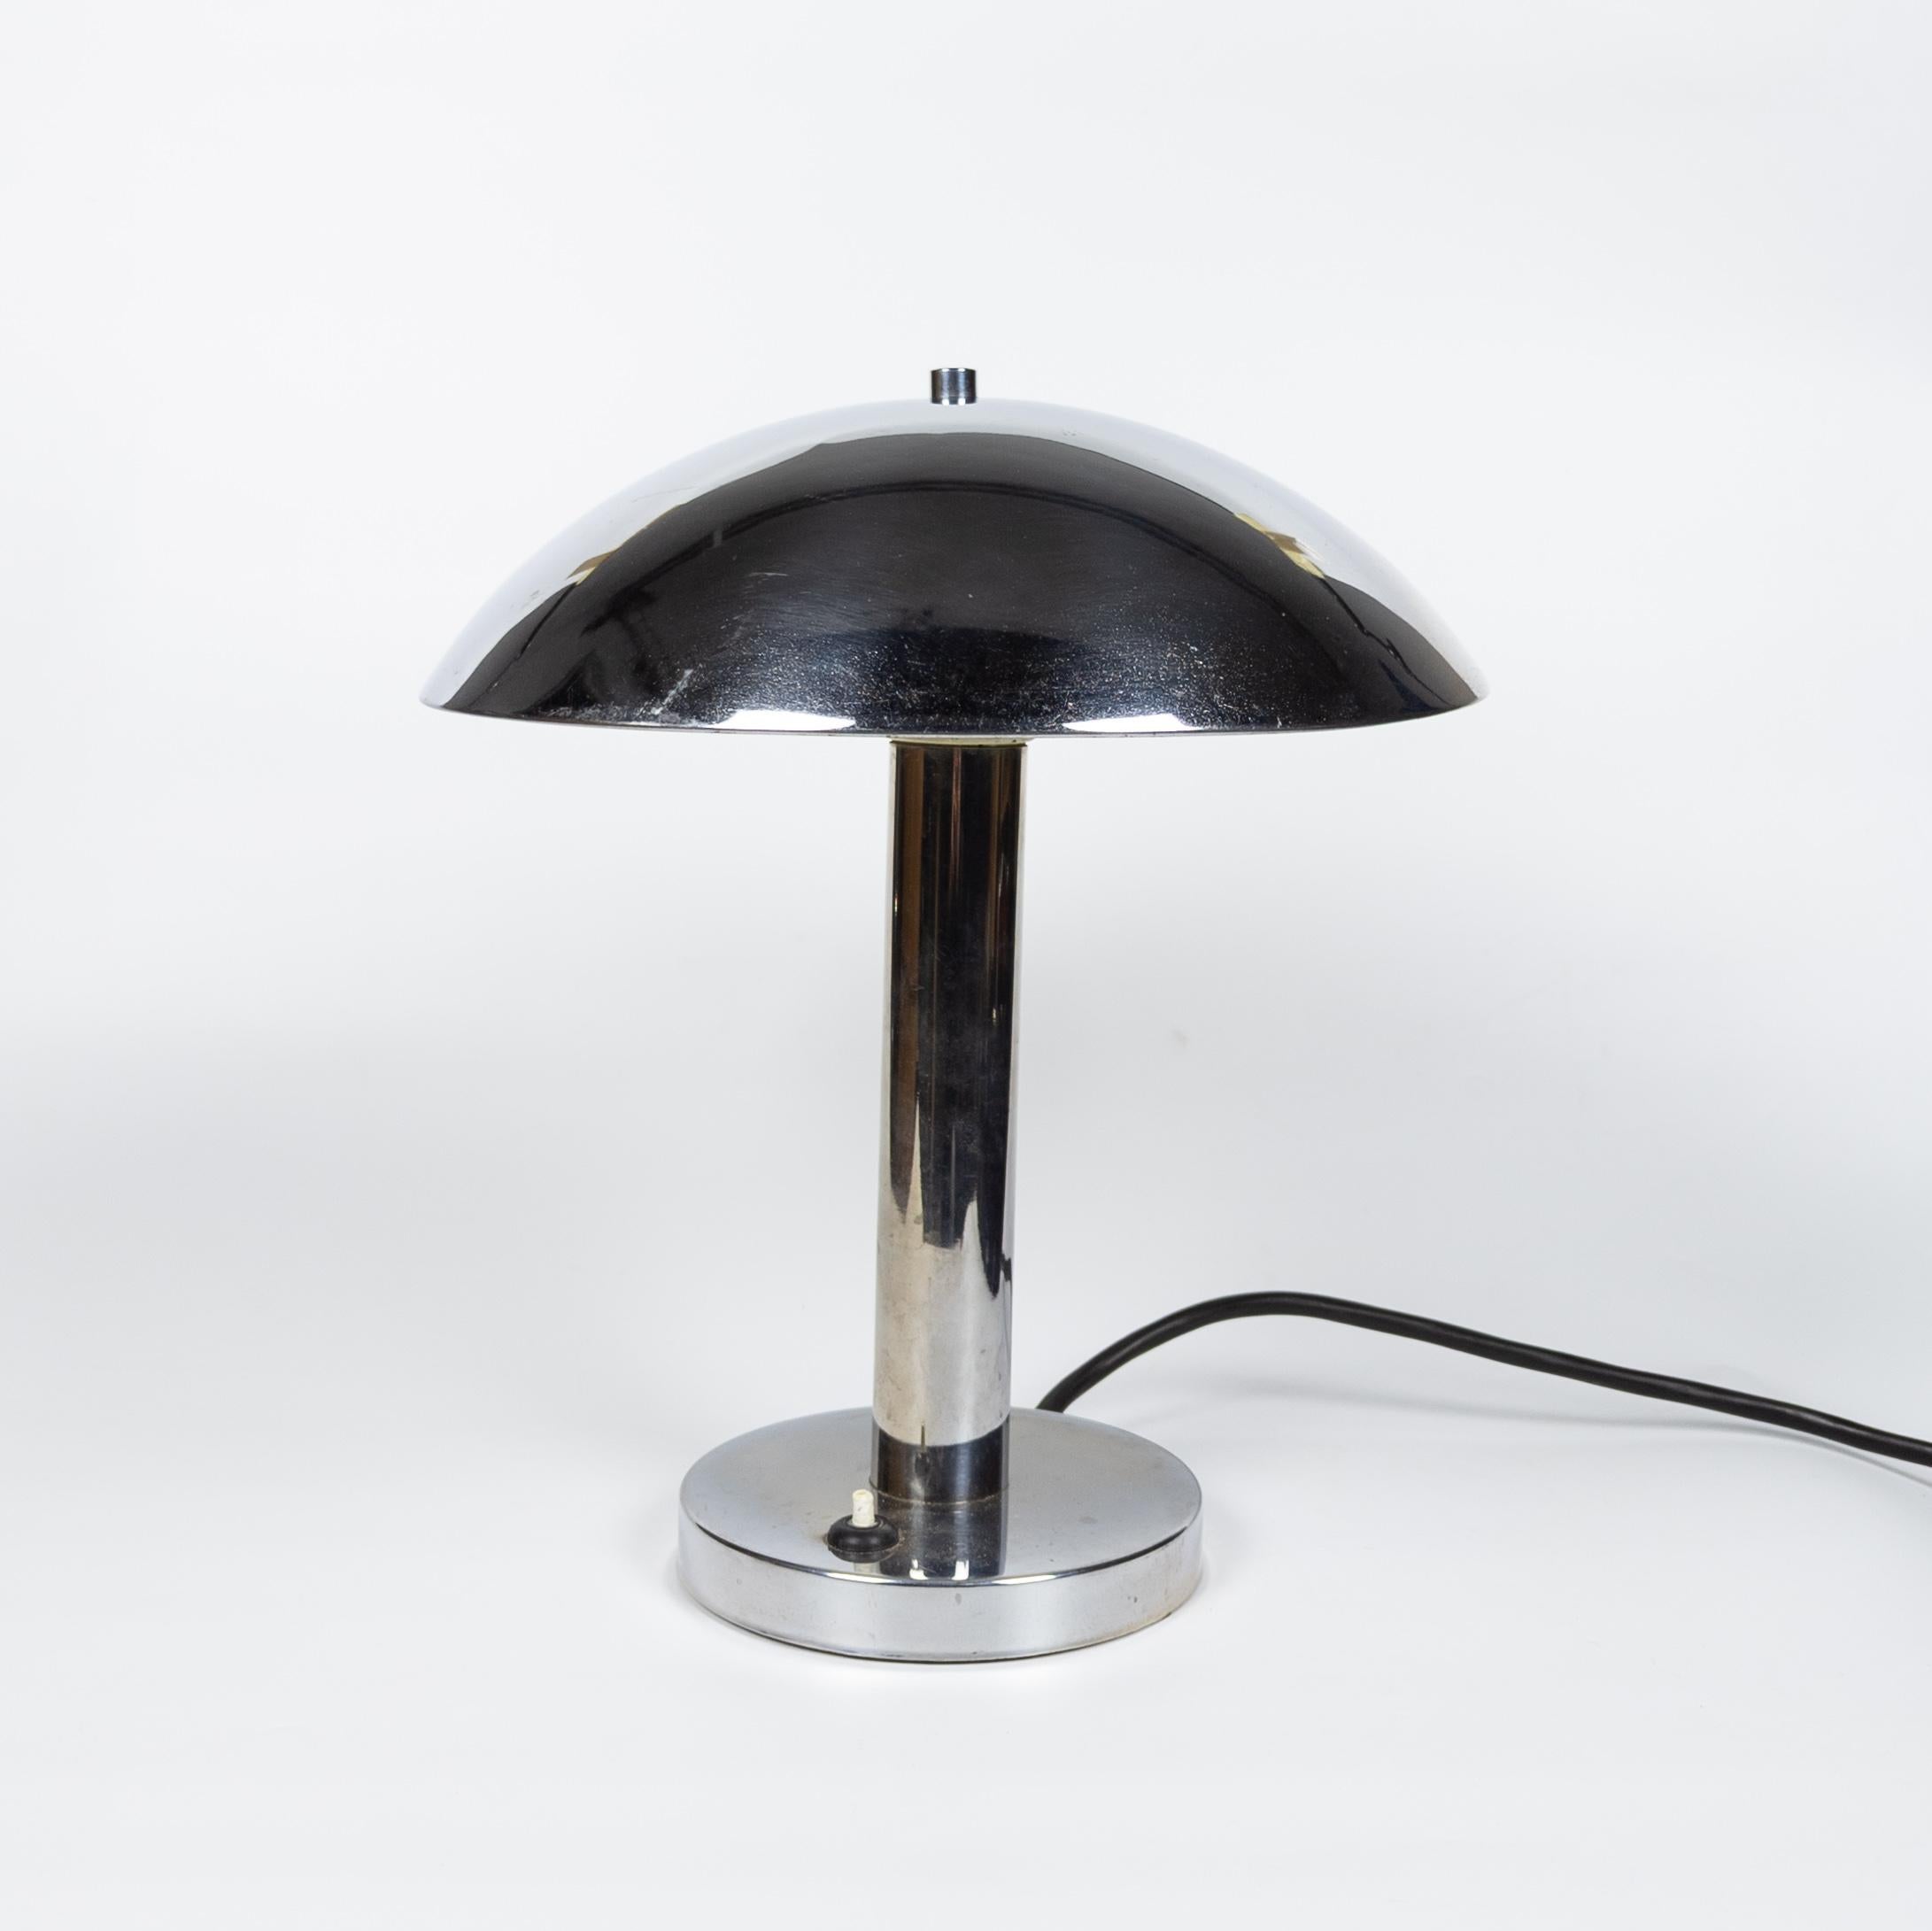 Minimalist chrome plated table lamp designed by Czech architect Miroslav Prokop for Napako company, former Czechoslovakia in 1930's. Fine example of Czech functionalism in excellent original condition. Fully operational, E27 bulb. 